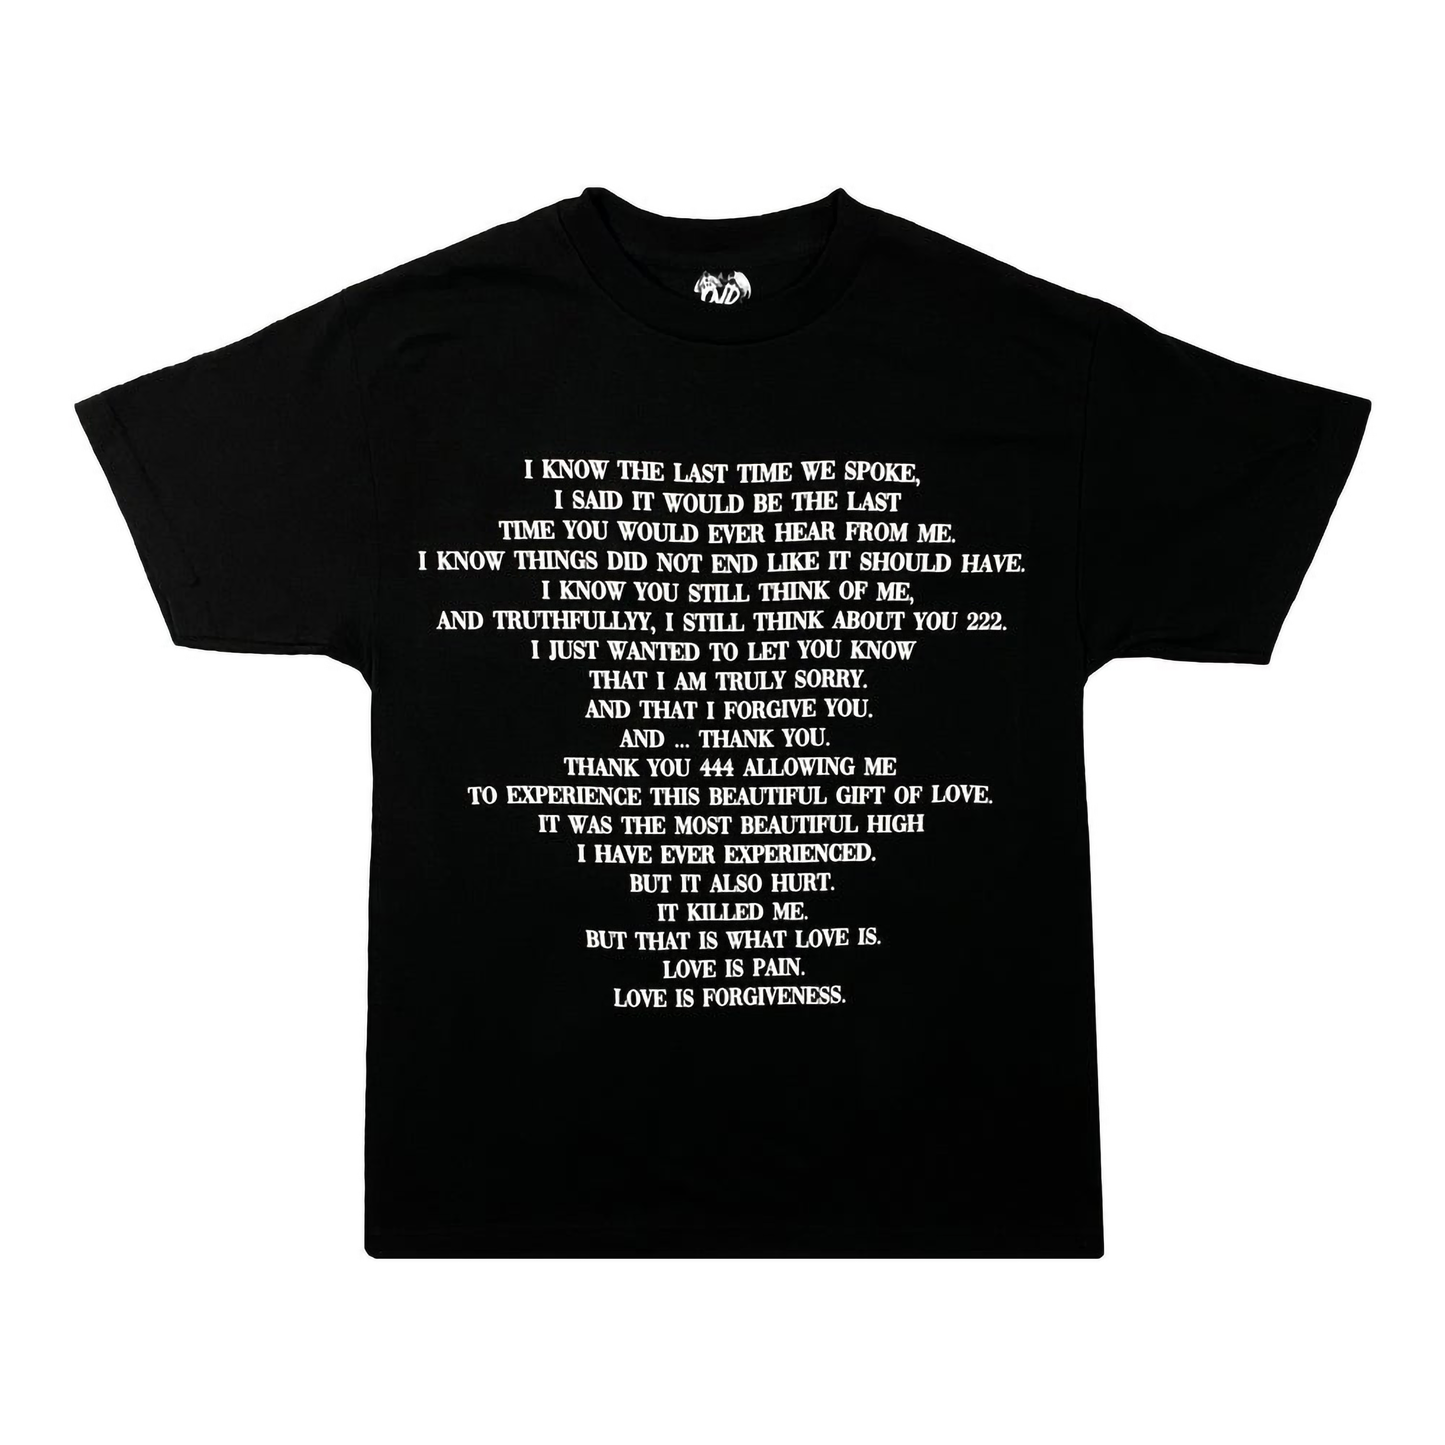 “A LETTER 222 MY EX” - BLACK TEE